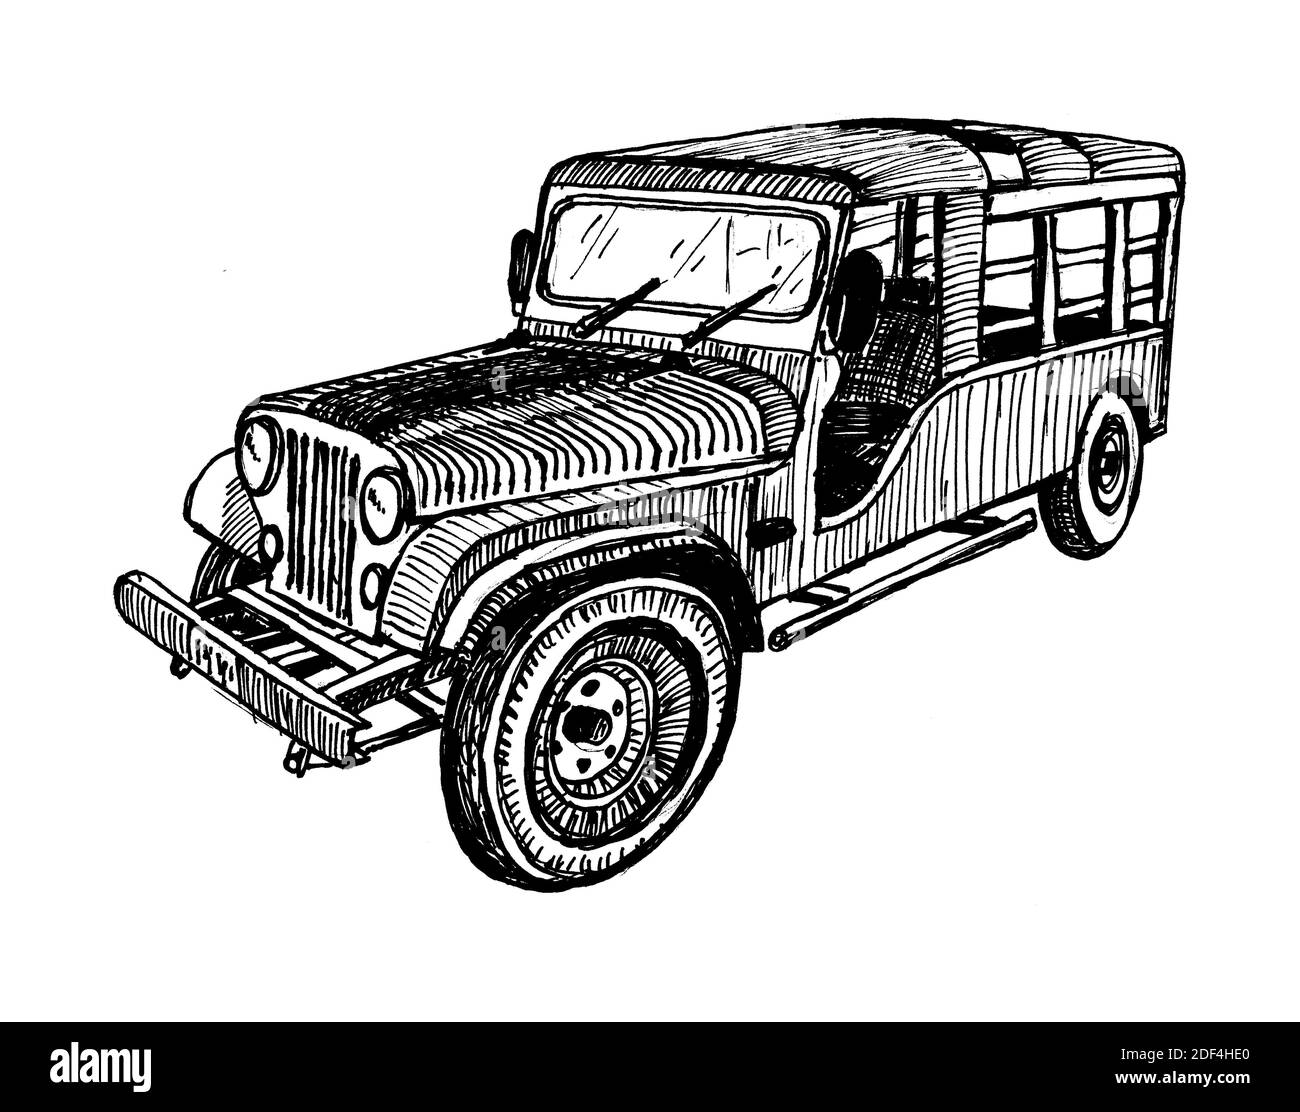 Hand drawn Old Timer car 4 wd classic, sketch graphics monochrome illustration on white background (originals, no tracing) Stock Photo